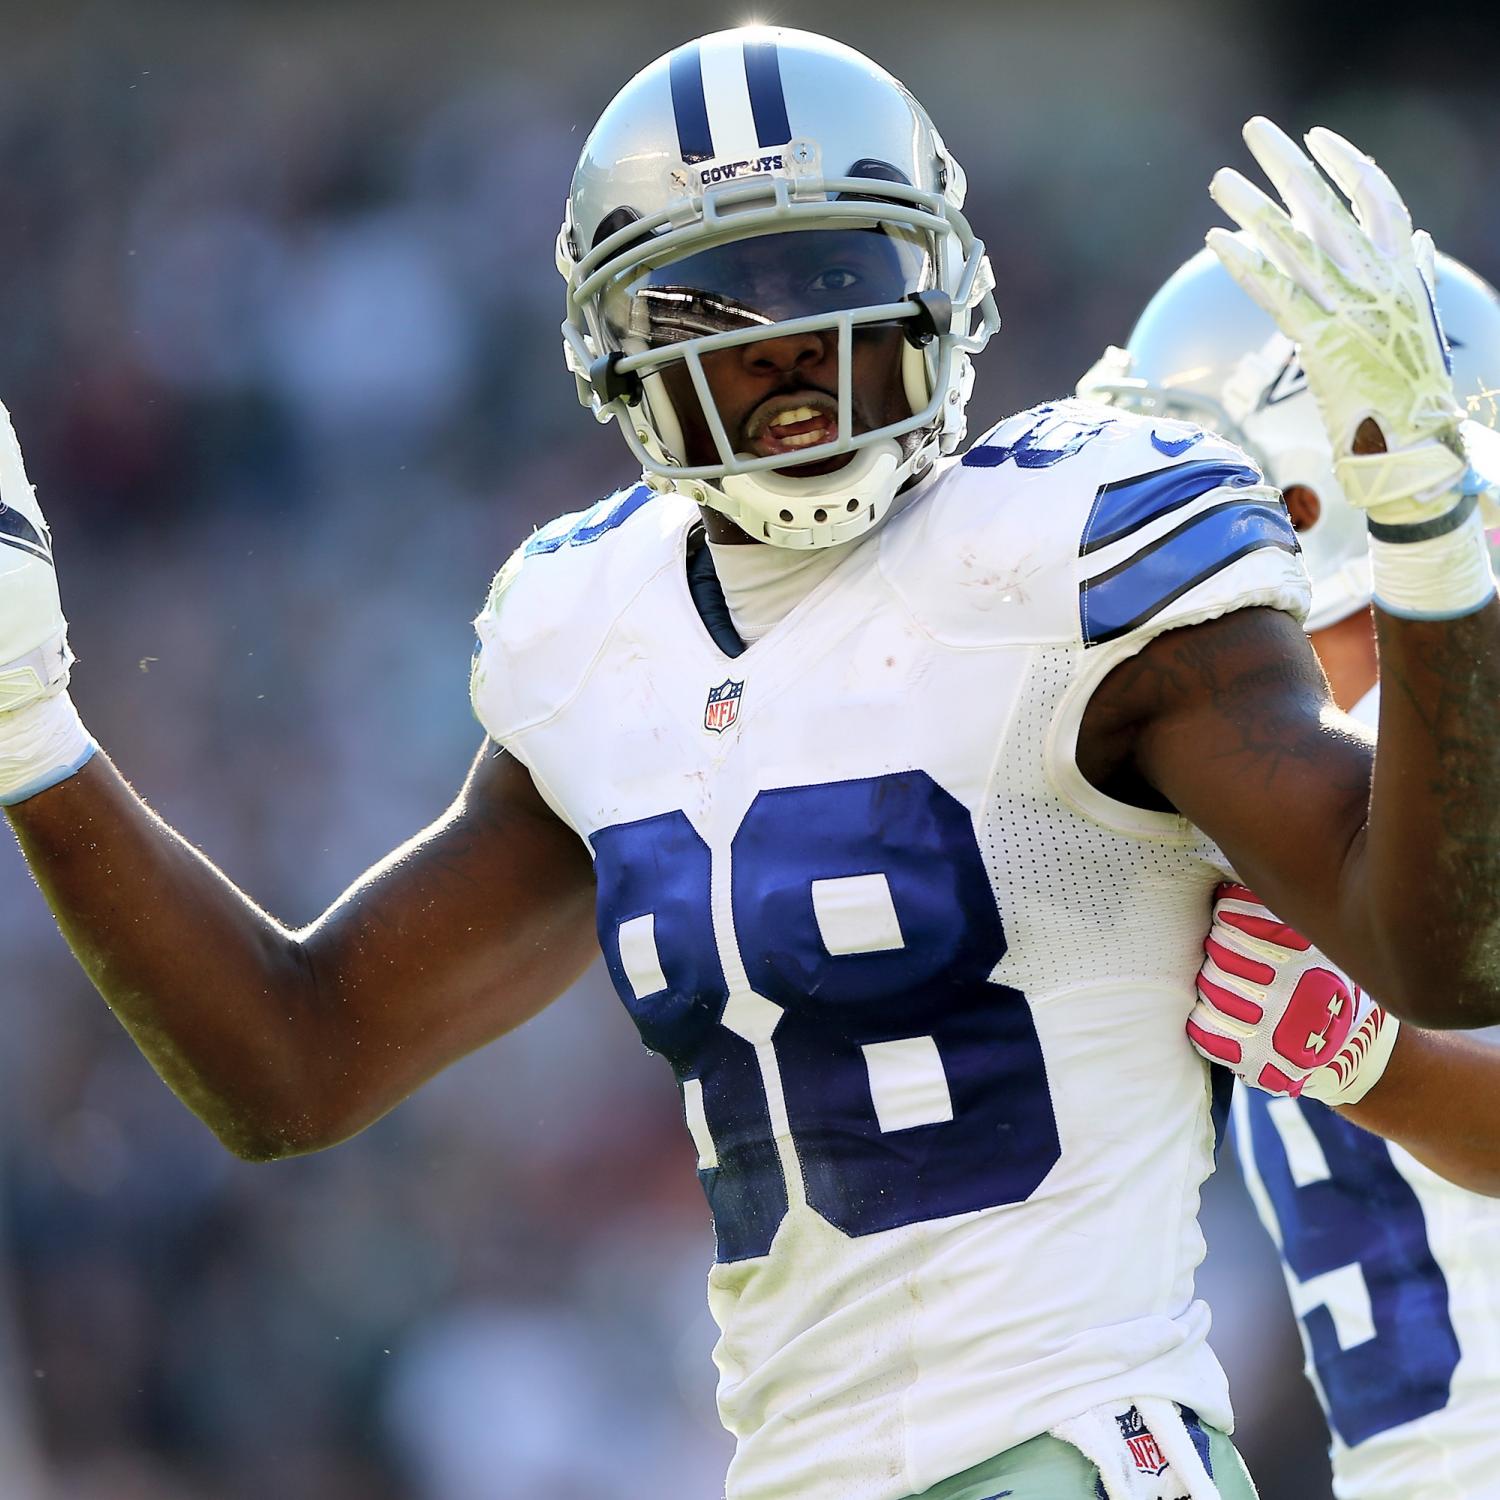 Dez Bryant Positive Energy Aside Has Every Reason to Be Mad at